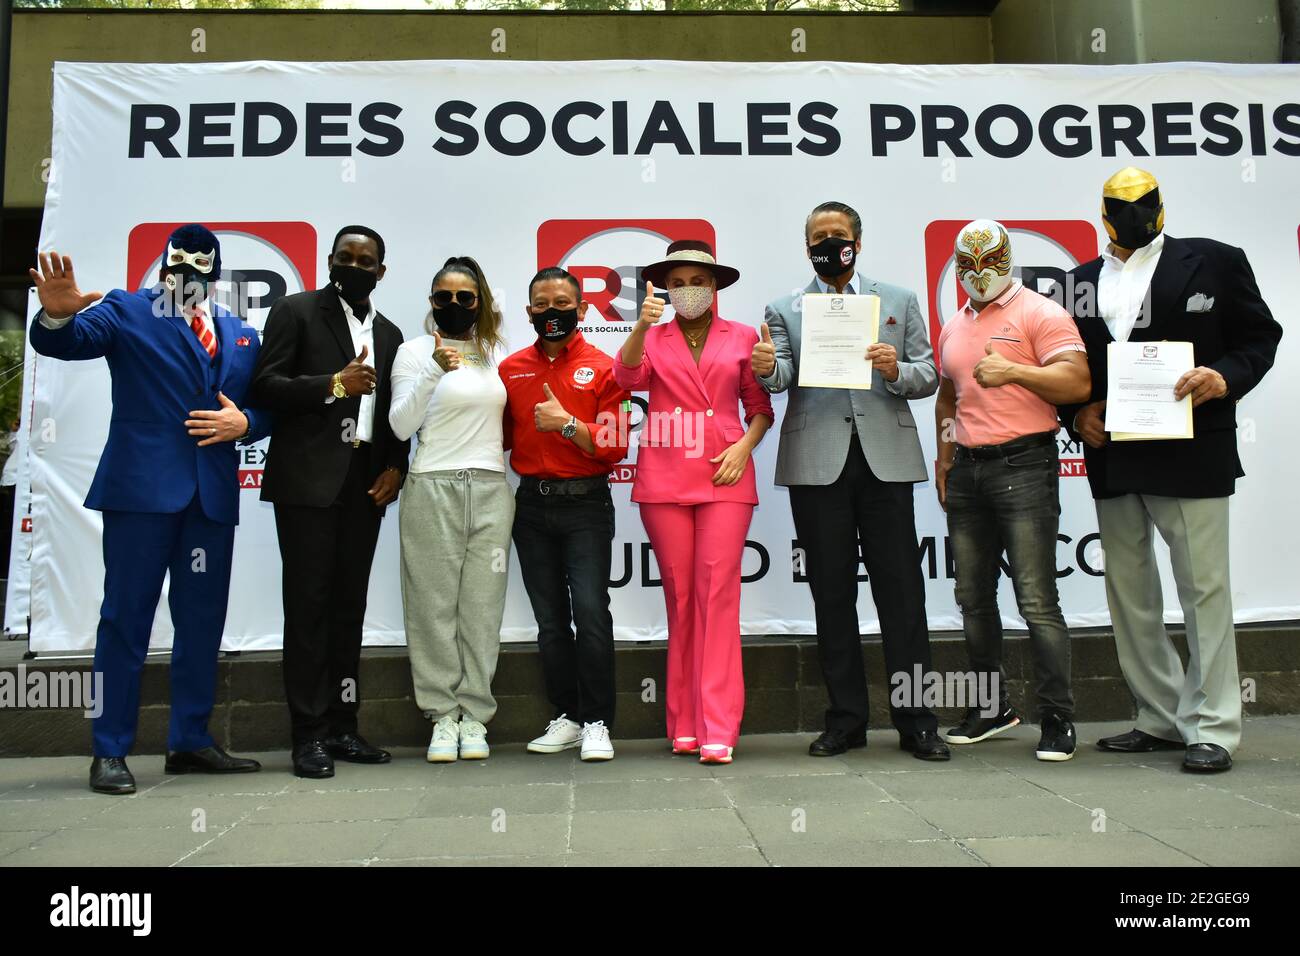 Mexico City, Mexico. 13th Jan, 2021. MEXICO CITY, MEXICO JANUARY 13: (L-R) Blue Demon Jr, Mariana Juarez, Hector Hernandez, Malillany Marin, Alfredo Adame, Mistico, Tinieblas, integrants of Progressive Social Networks Political party (RSP) pose for photos during the pre-registration as a new political party. On January 13, 2021 in Mexico City, Mexico. Credit: Ricardo Castelan Cruz/Eyepix Group/The Photo Access Credit: The Photo Access/Alamy Live News Stock Photo